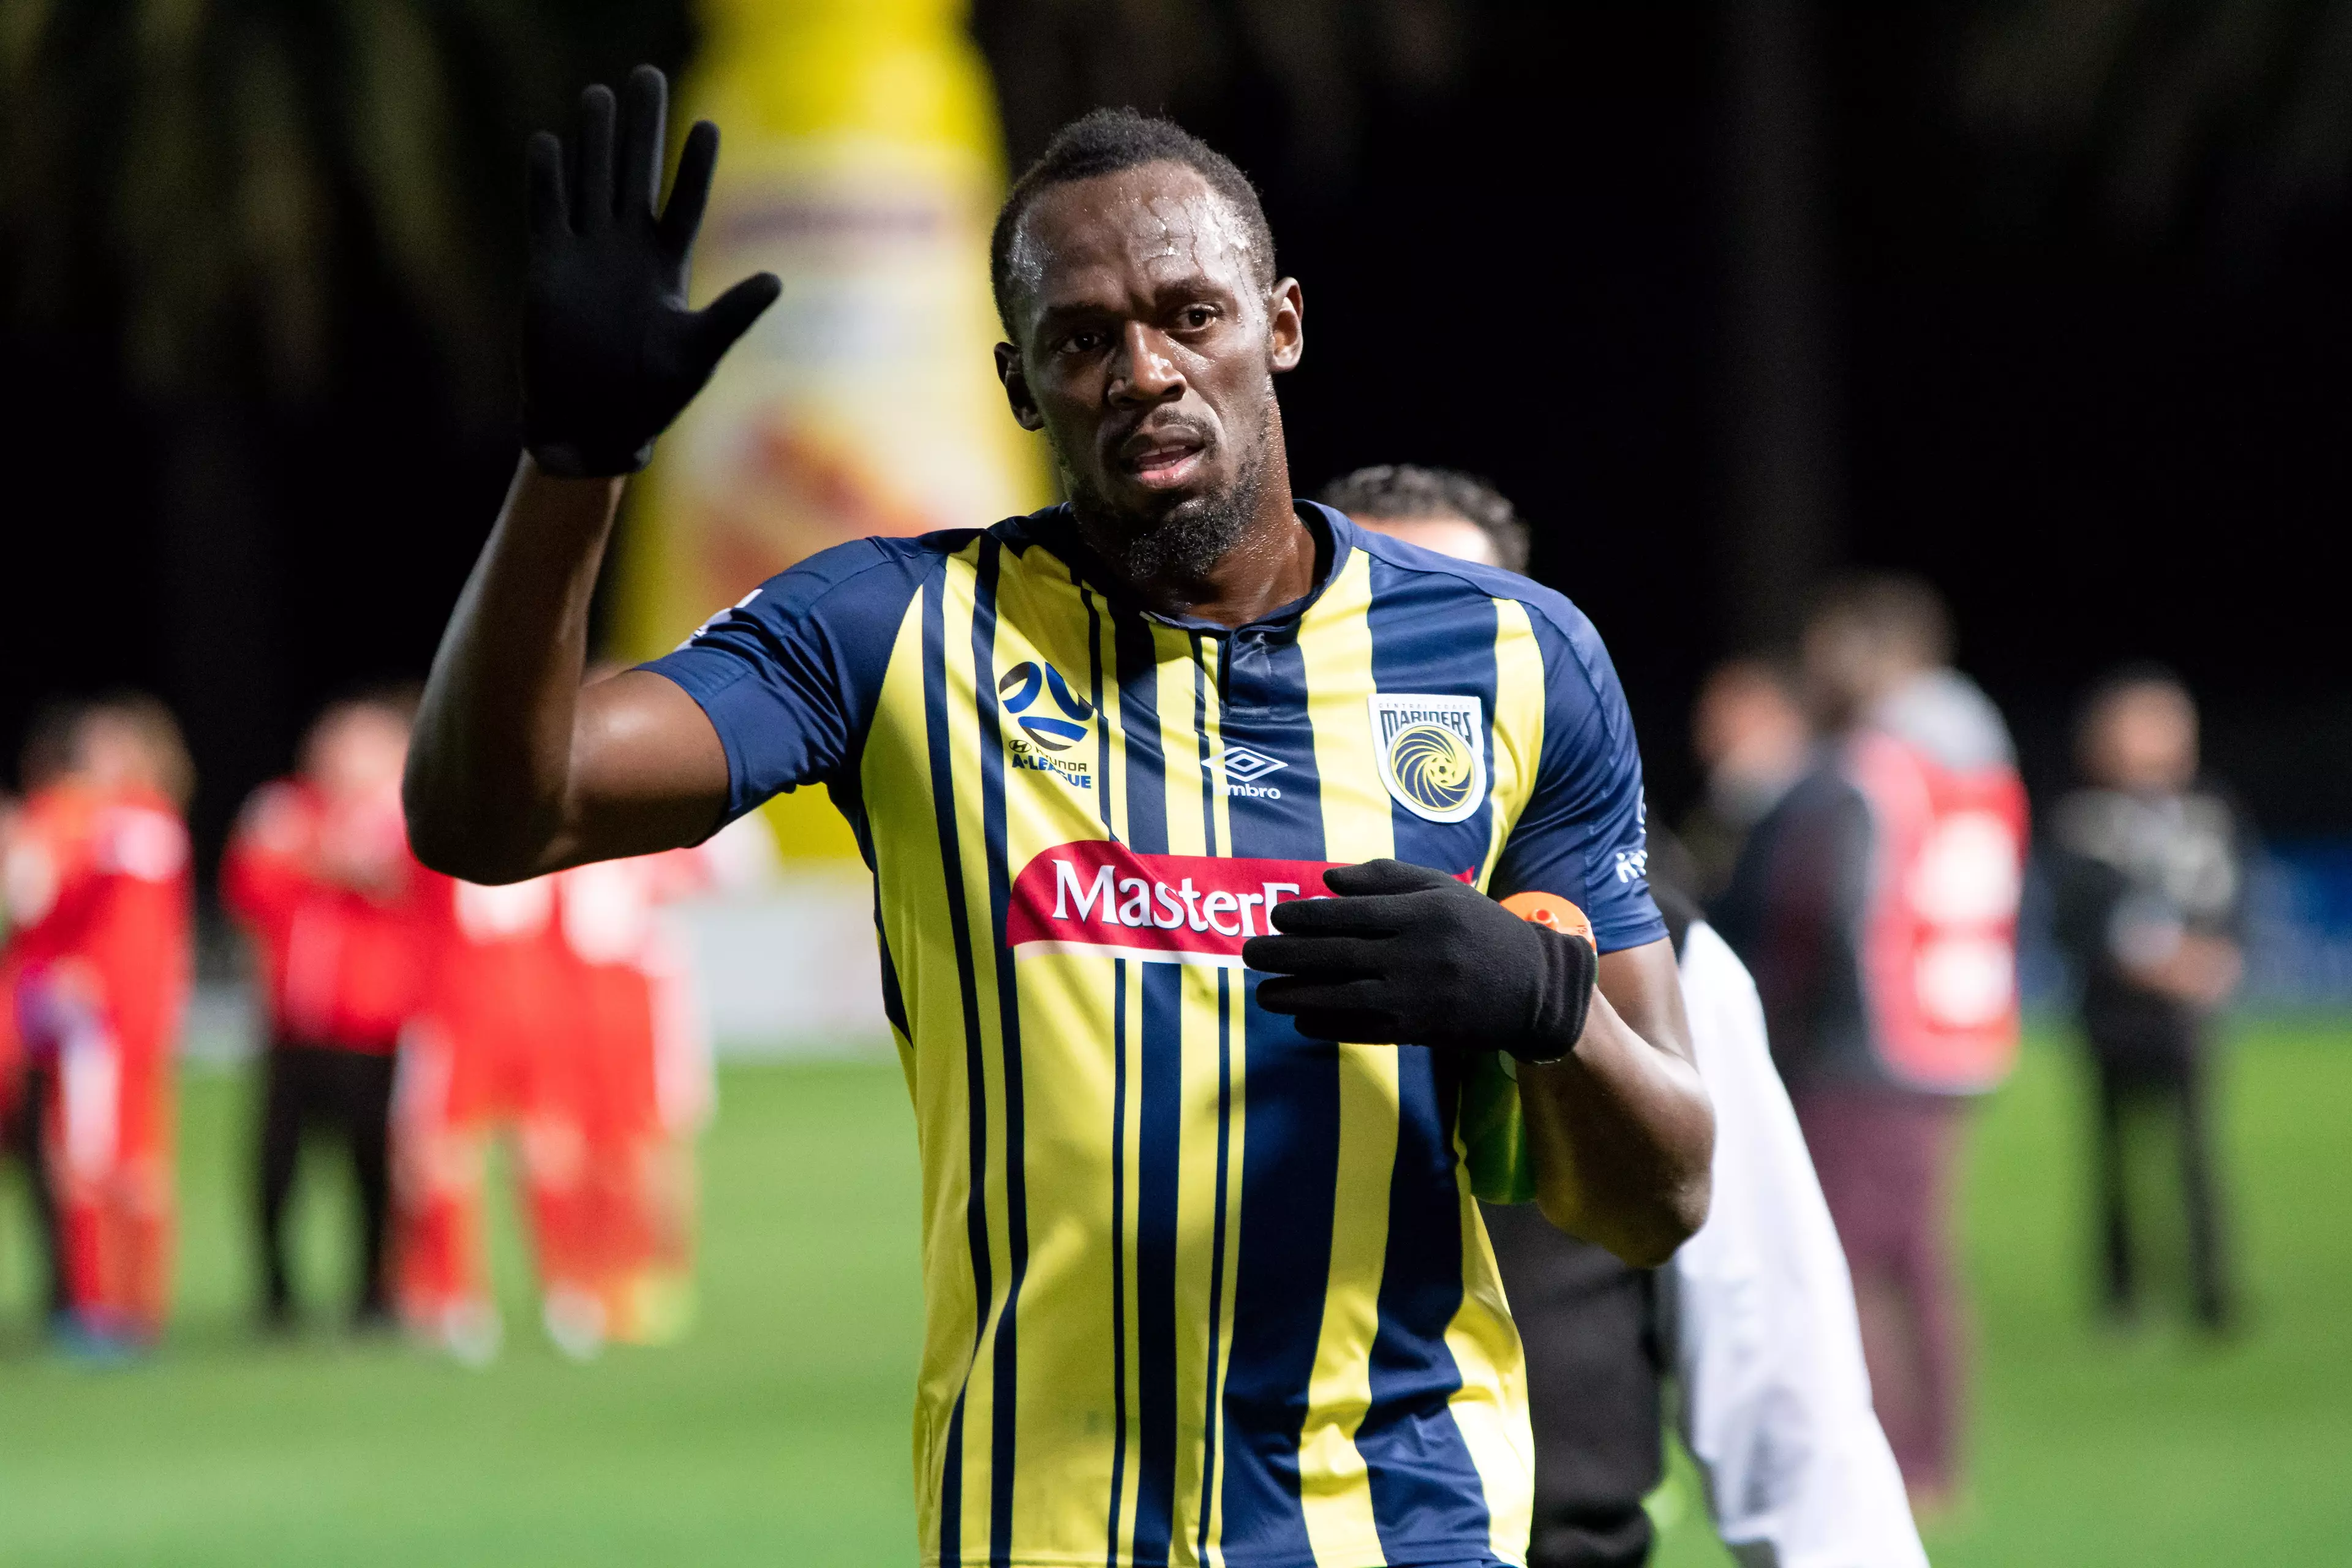 Usain Bolt could yet turn up for United. Image: PA Images